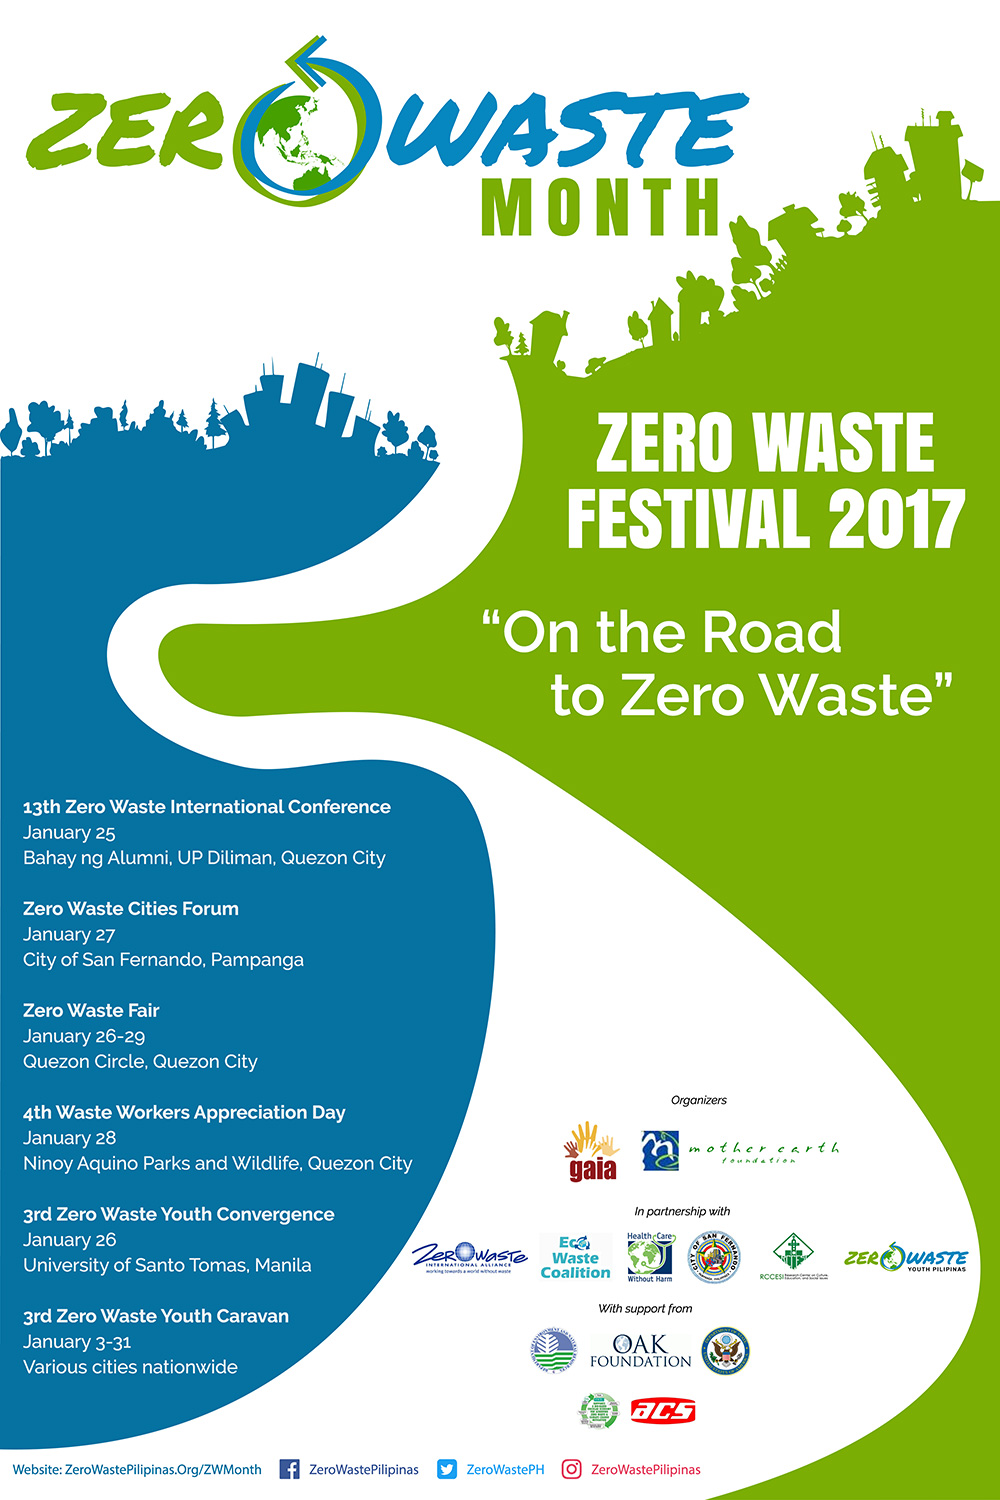 Learn more about Zero Waste and discover the state of waste management in the Philippines. Join the conversation! Use the following on your social media accounts: #ZeroWastePH #GoForZeroWaste #ZeroWasteMonth